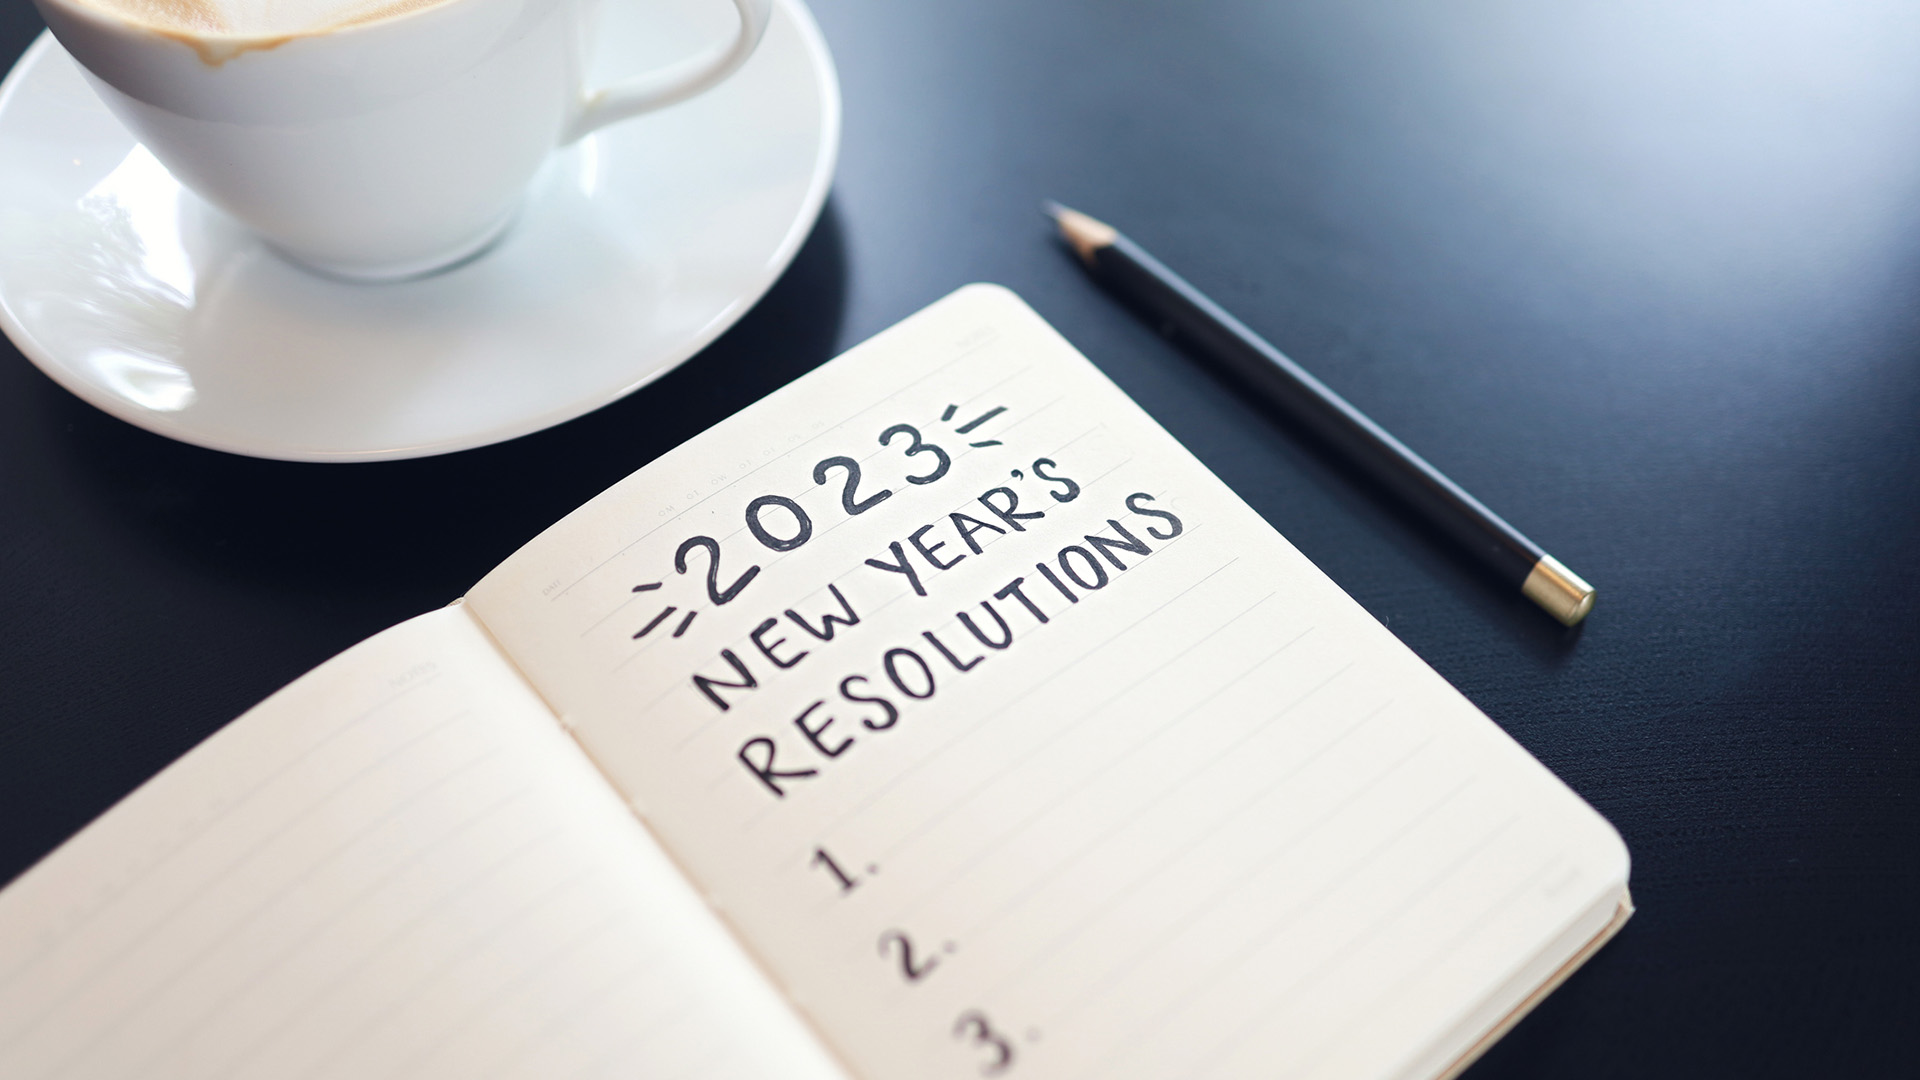 2023 New Year's Resolution Text on Note Pad